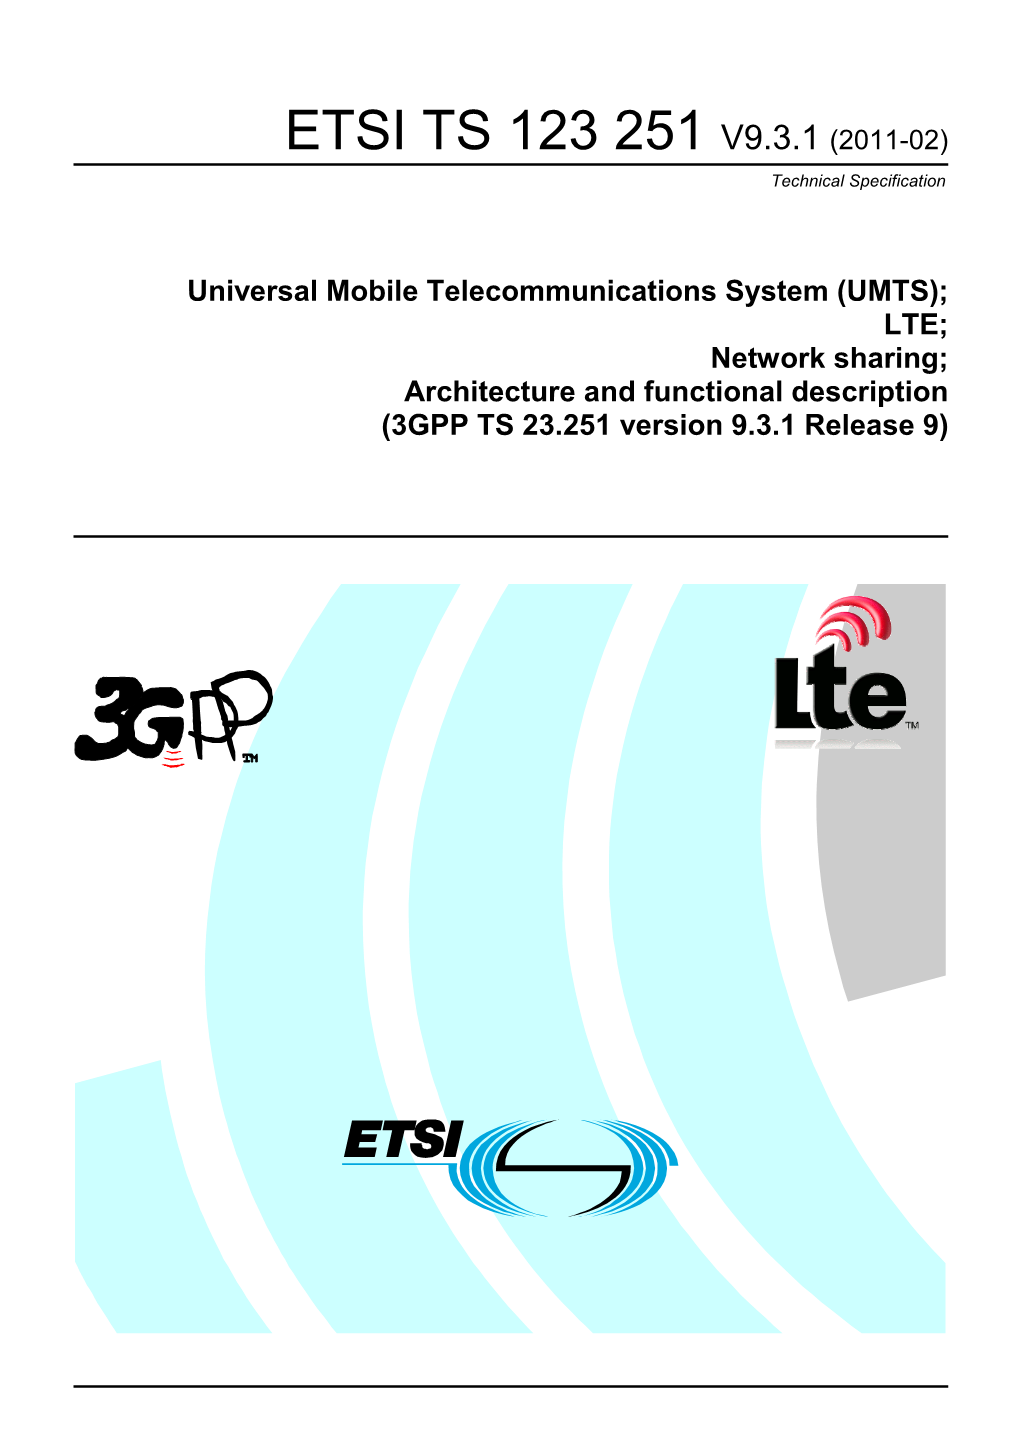 UMTS); LTE; Network Sharing; Architecture and Functional Description (3GPP TS 23.251 Version 9.3.1 Release 9